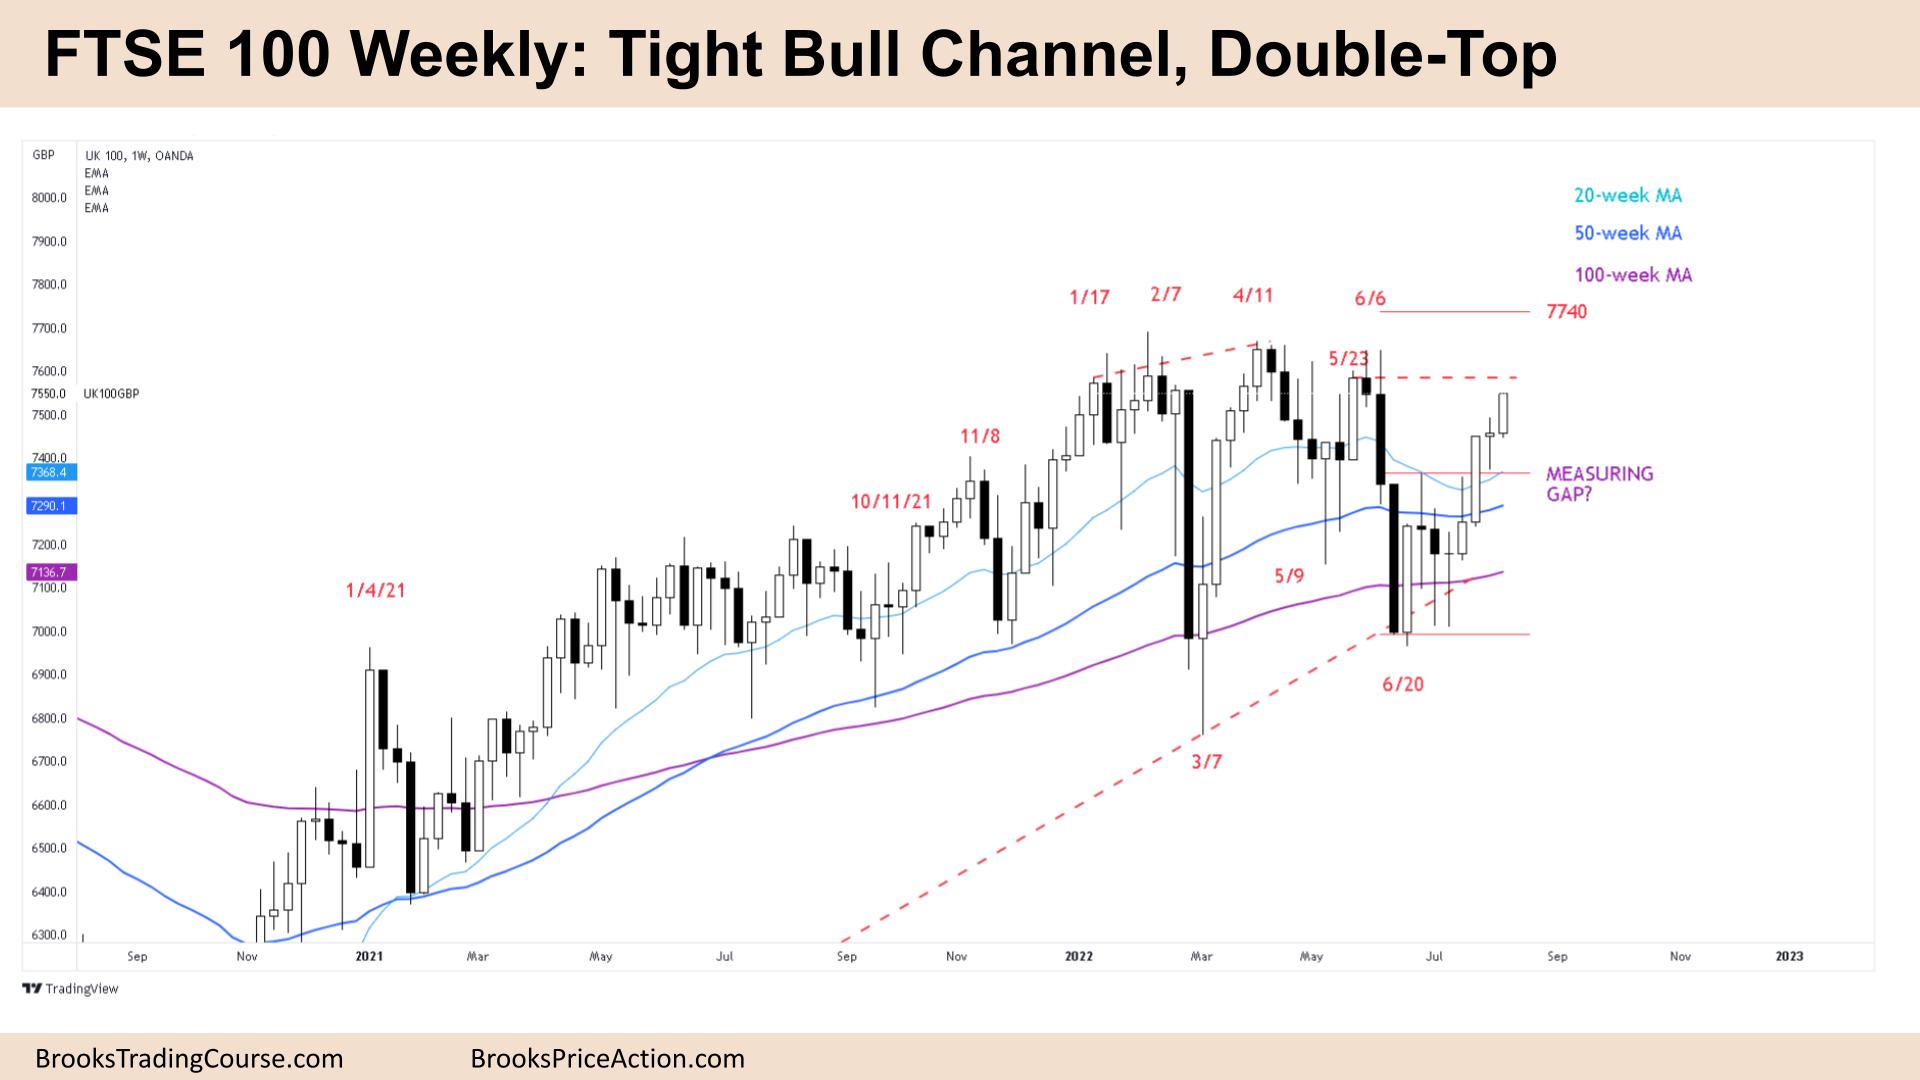 FTSE 100 Tight Bull Channel Double-Top on weekly chart